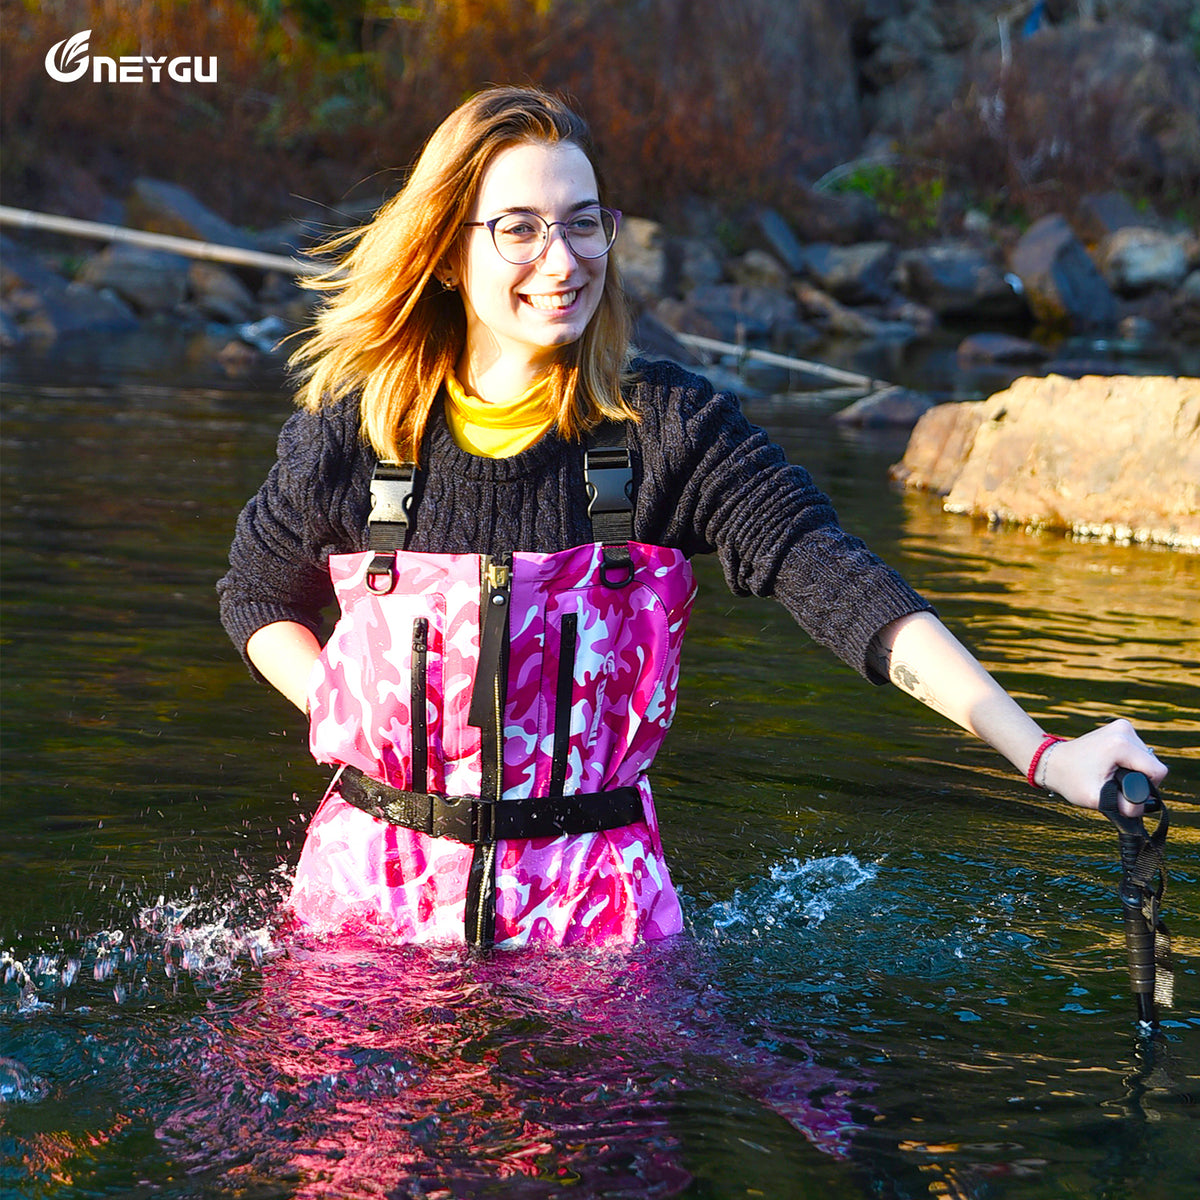 NEYGU ooutdoor women's fishing wader，waterproof &breathable pink camo  wader，chest wader for female attached with stocking foot for fishing  ,gardening